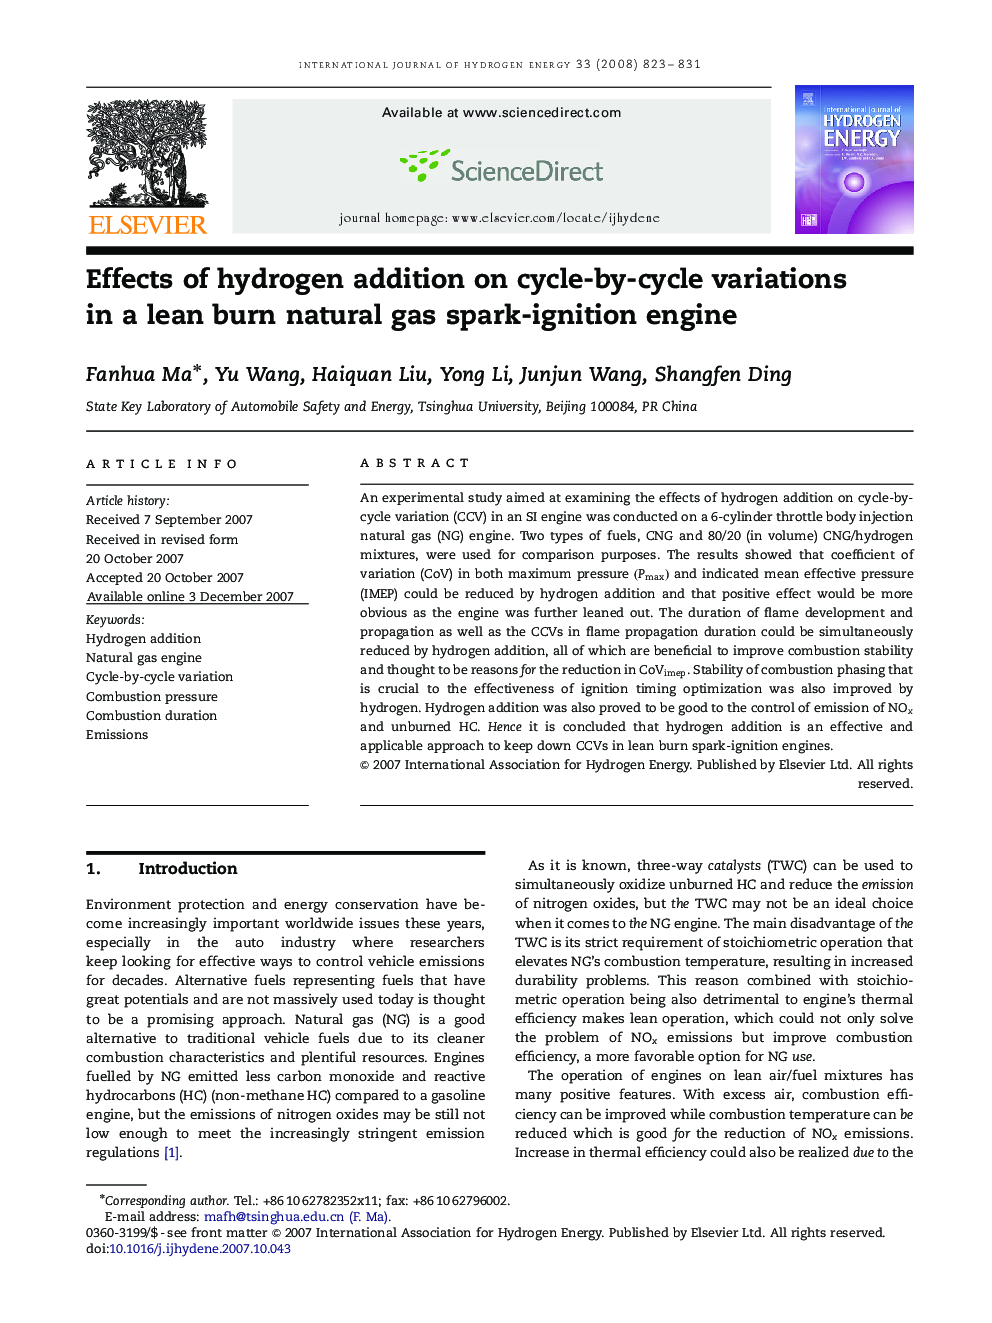 Effects of hydrogen addition on cycle-by-cycle variations in a lean burn natural gas spark-ignition engine